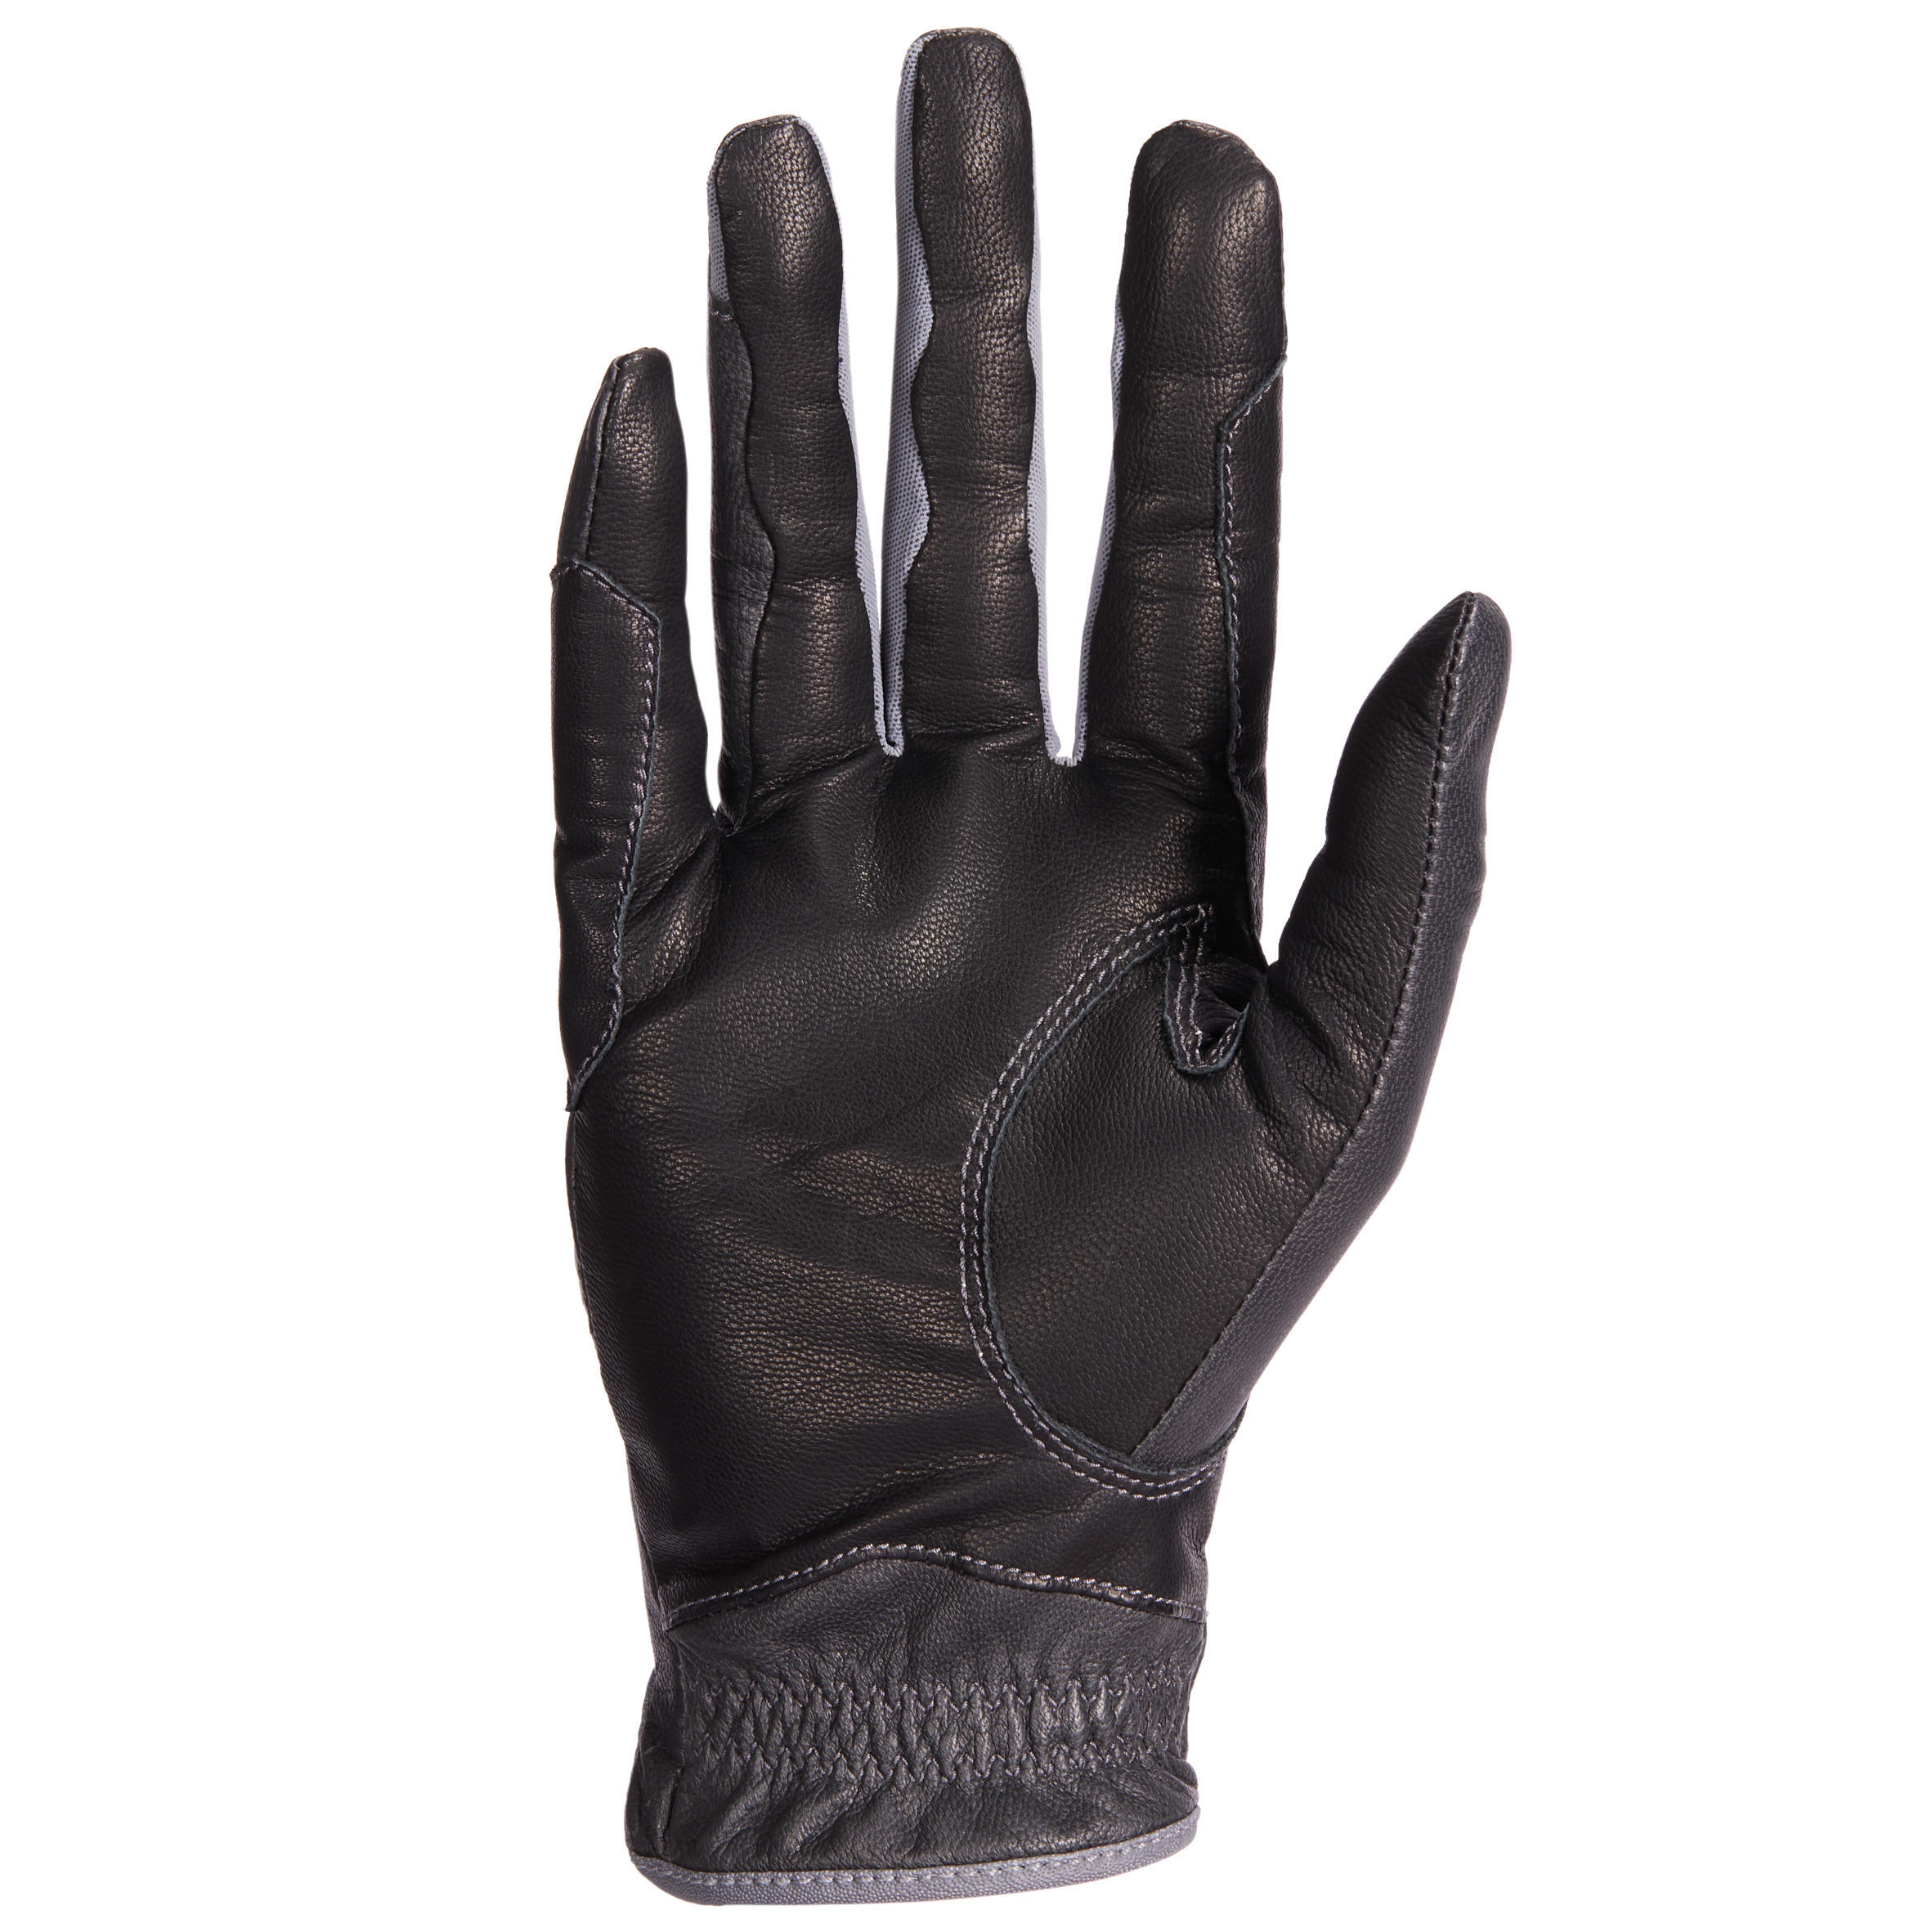 Women's Horse Riding Leather Gloves 900 - Black 2/7